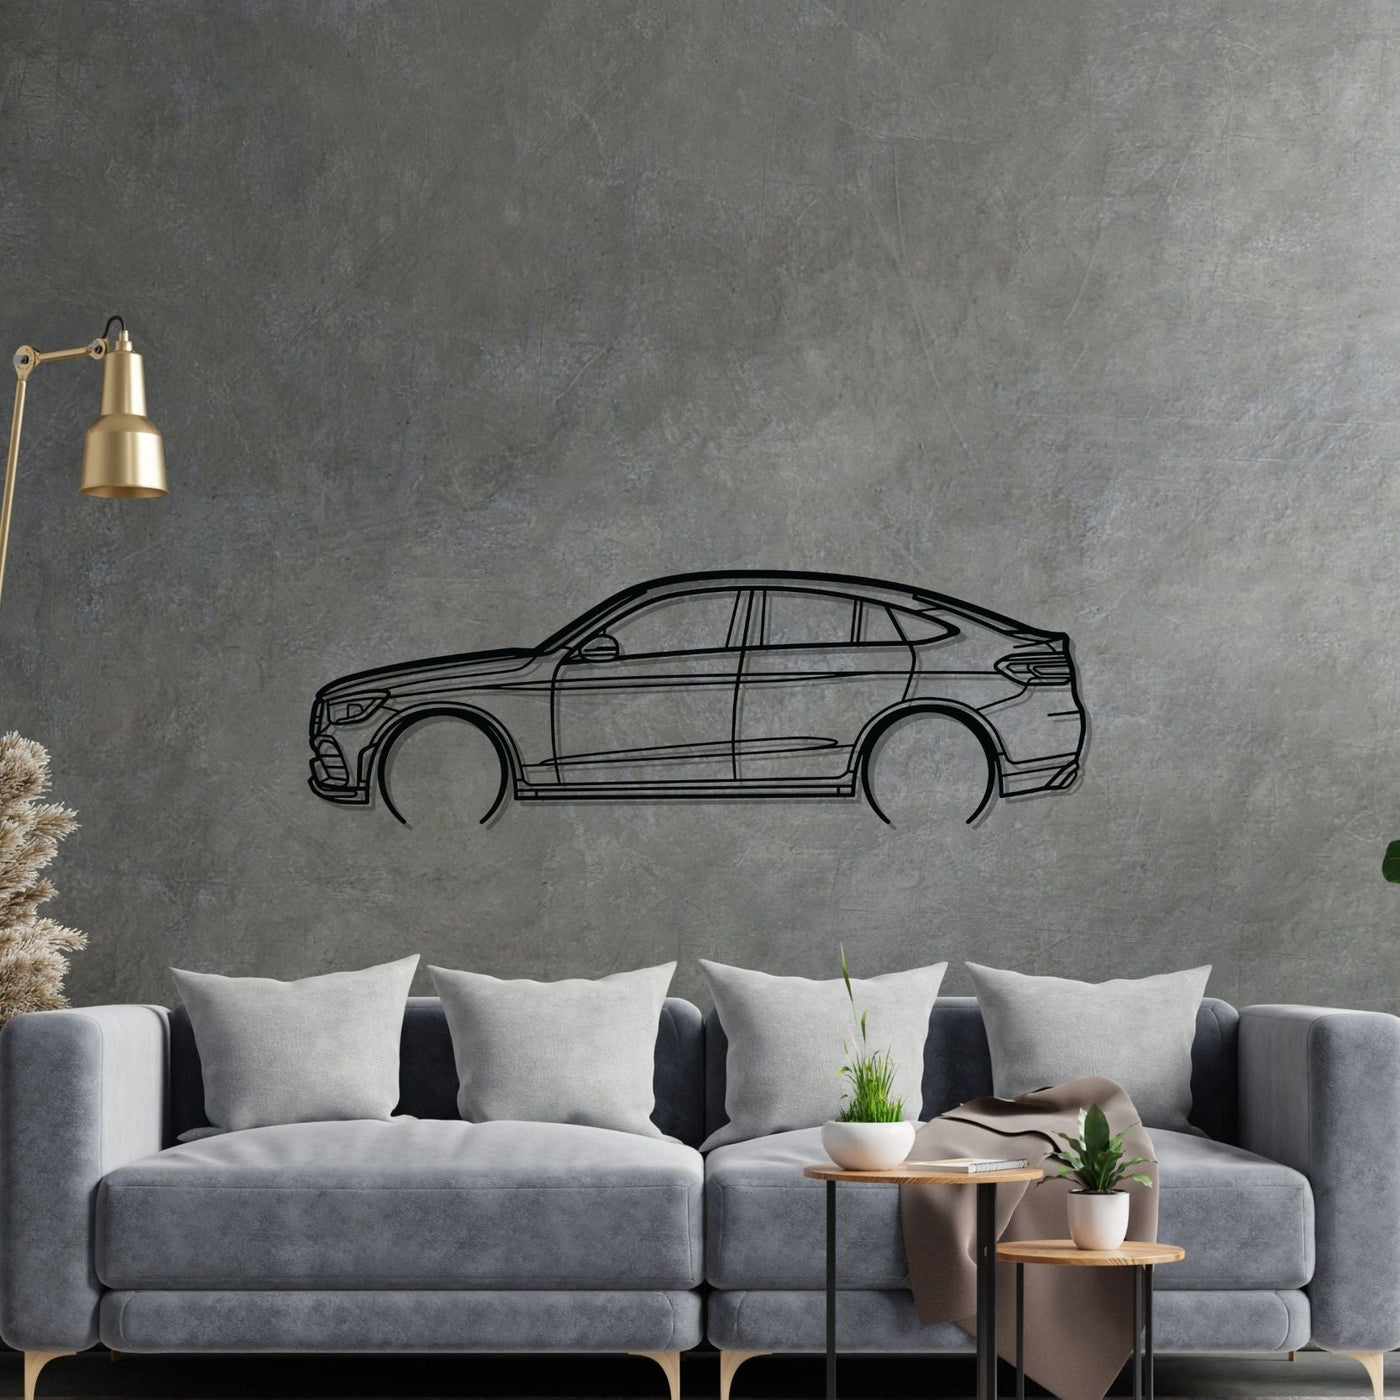 GLC Coupe Detailed Silhouette Metal Wall Art